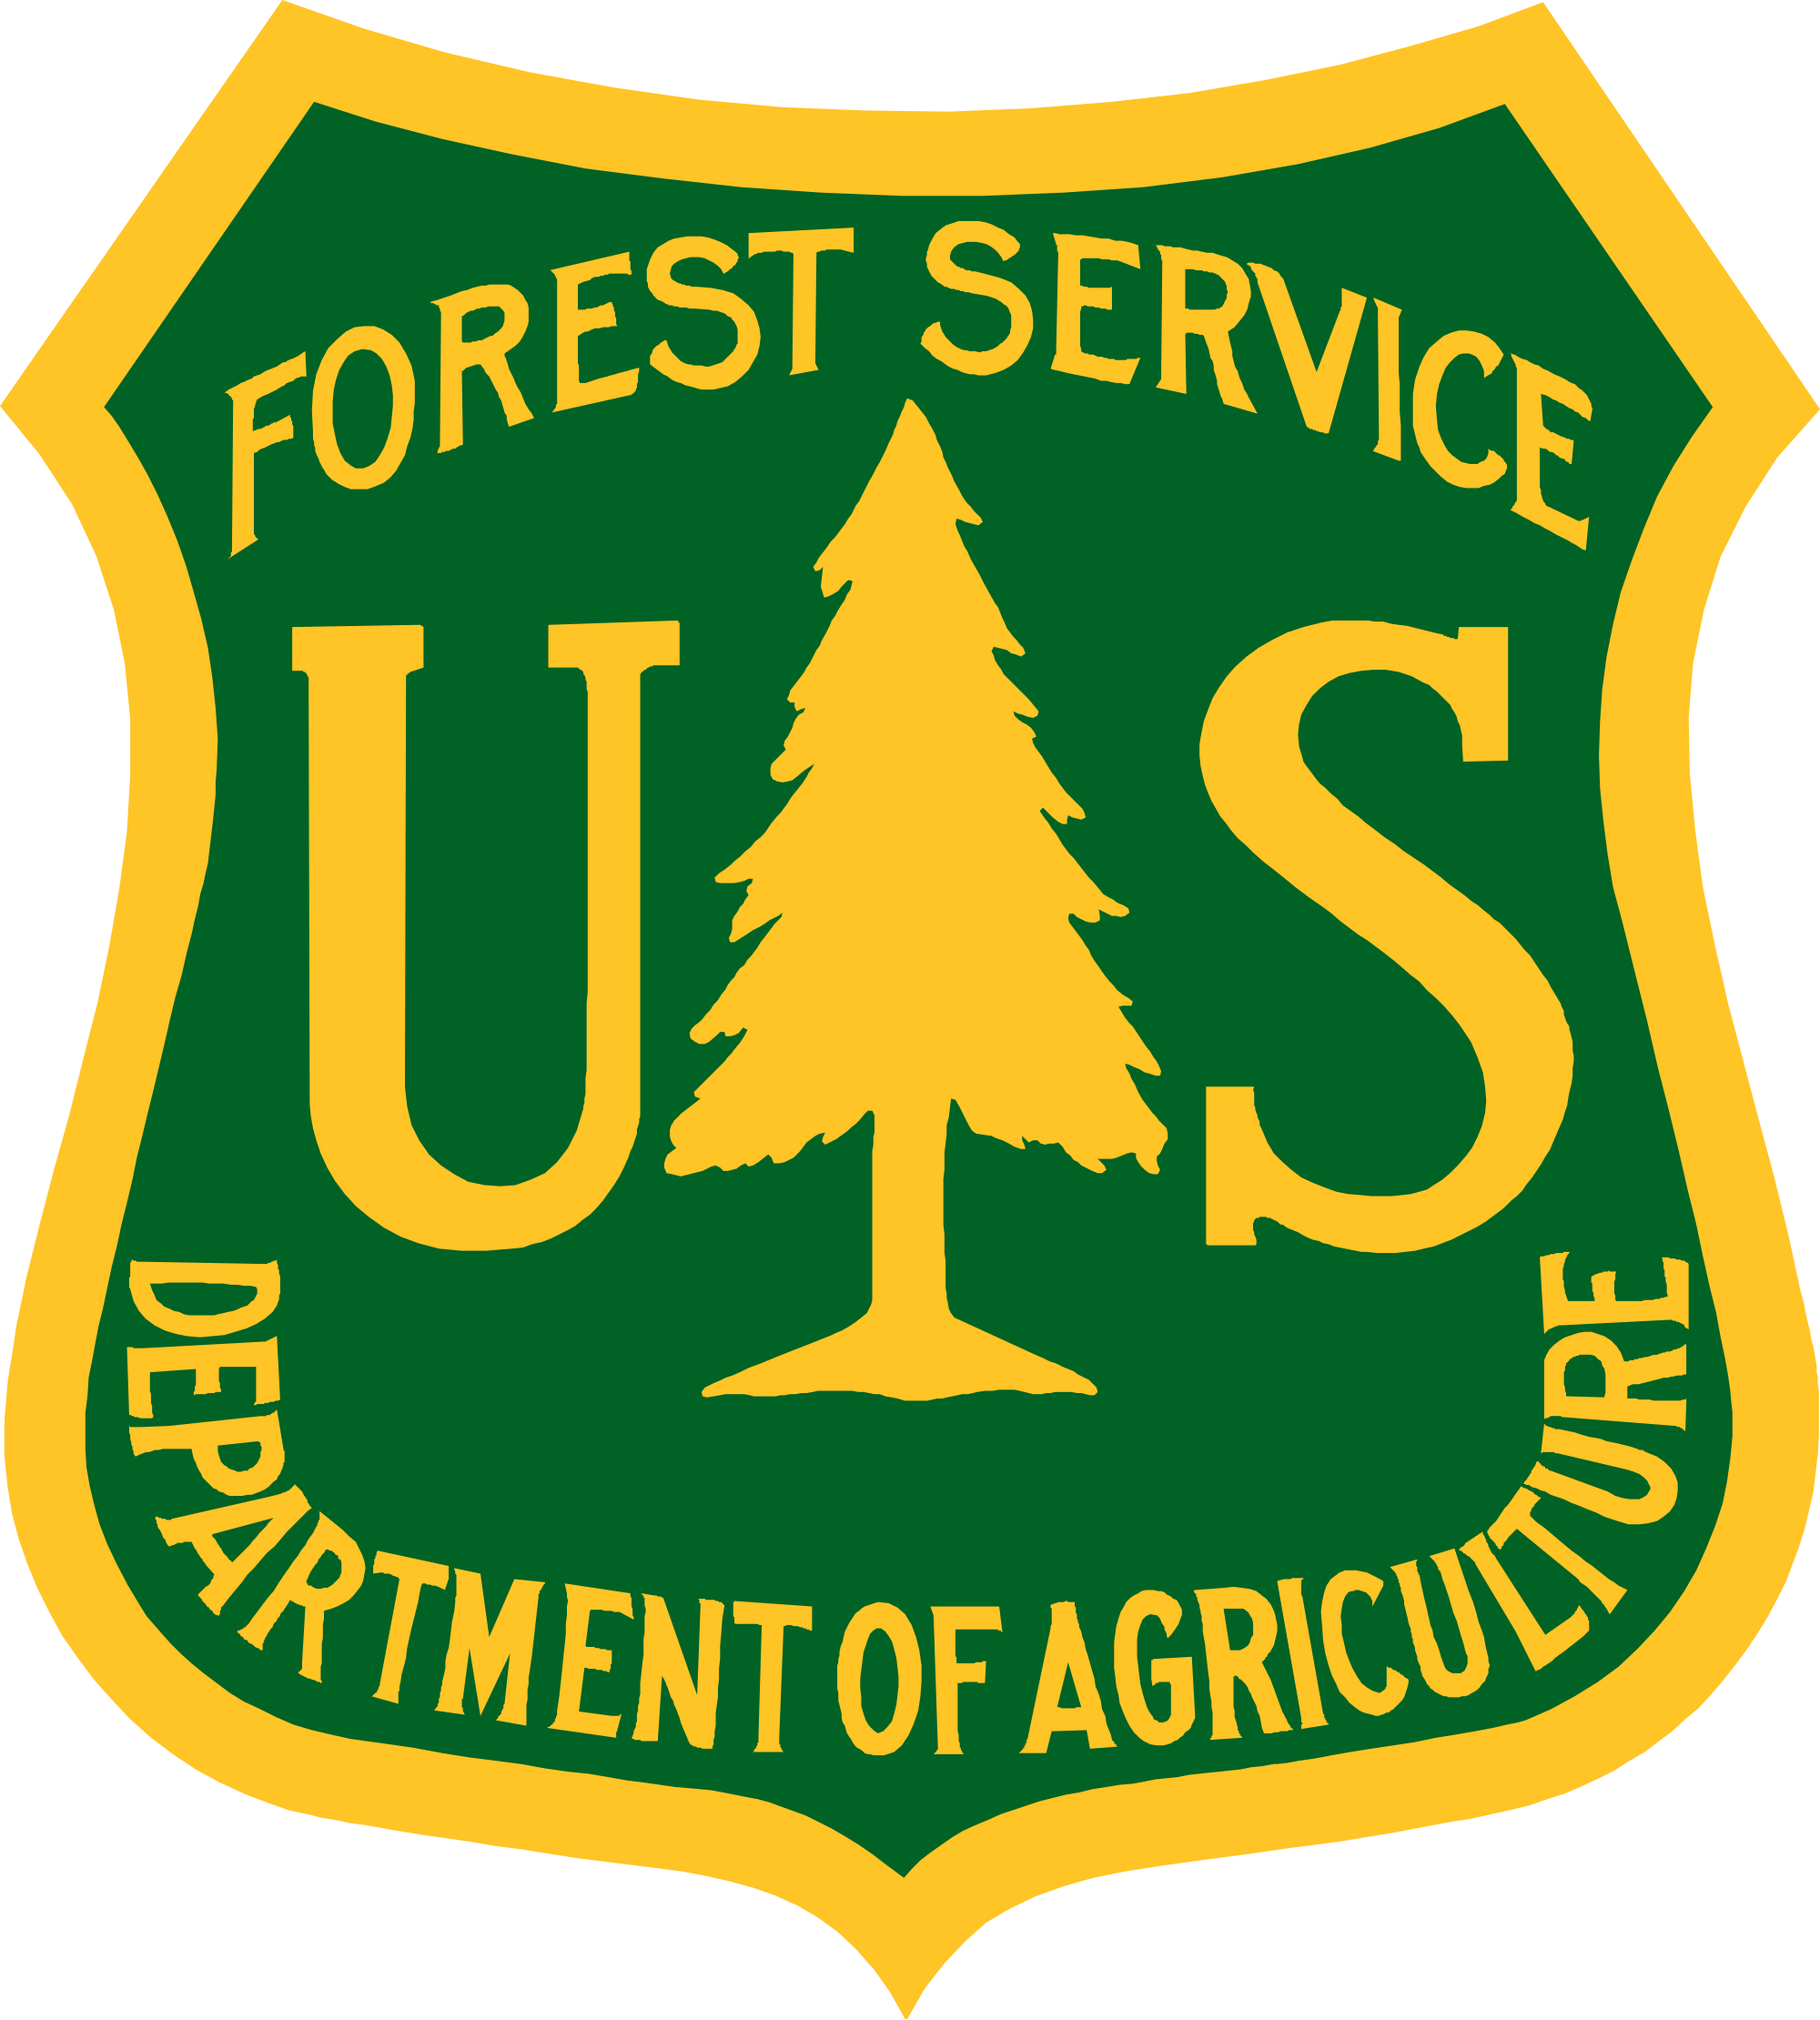 Forest Service Shield Clipart 2 By Natalie - Us Forest Service Founded (2000x2220)